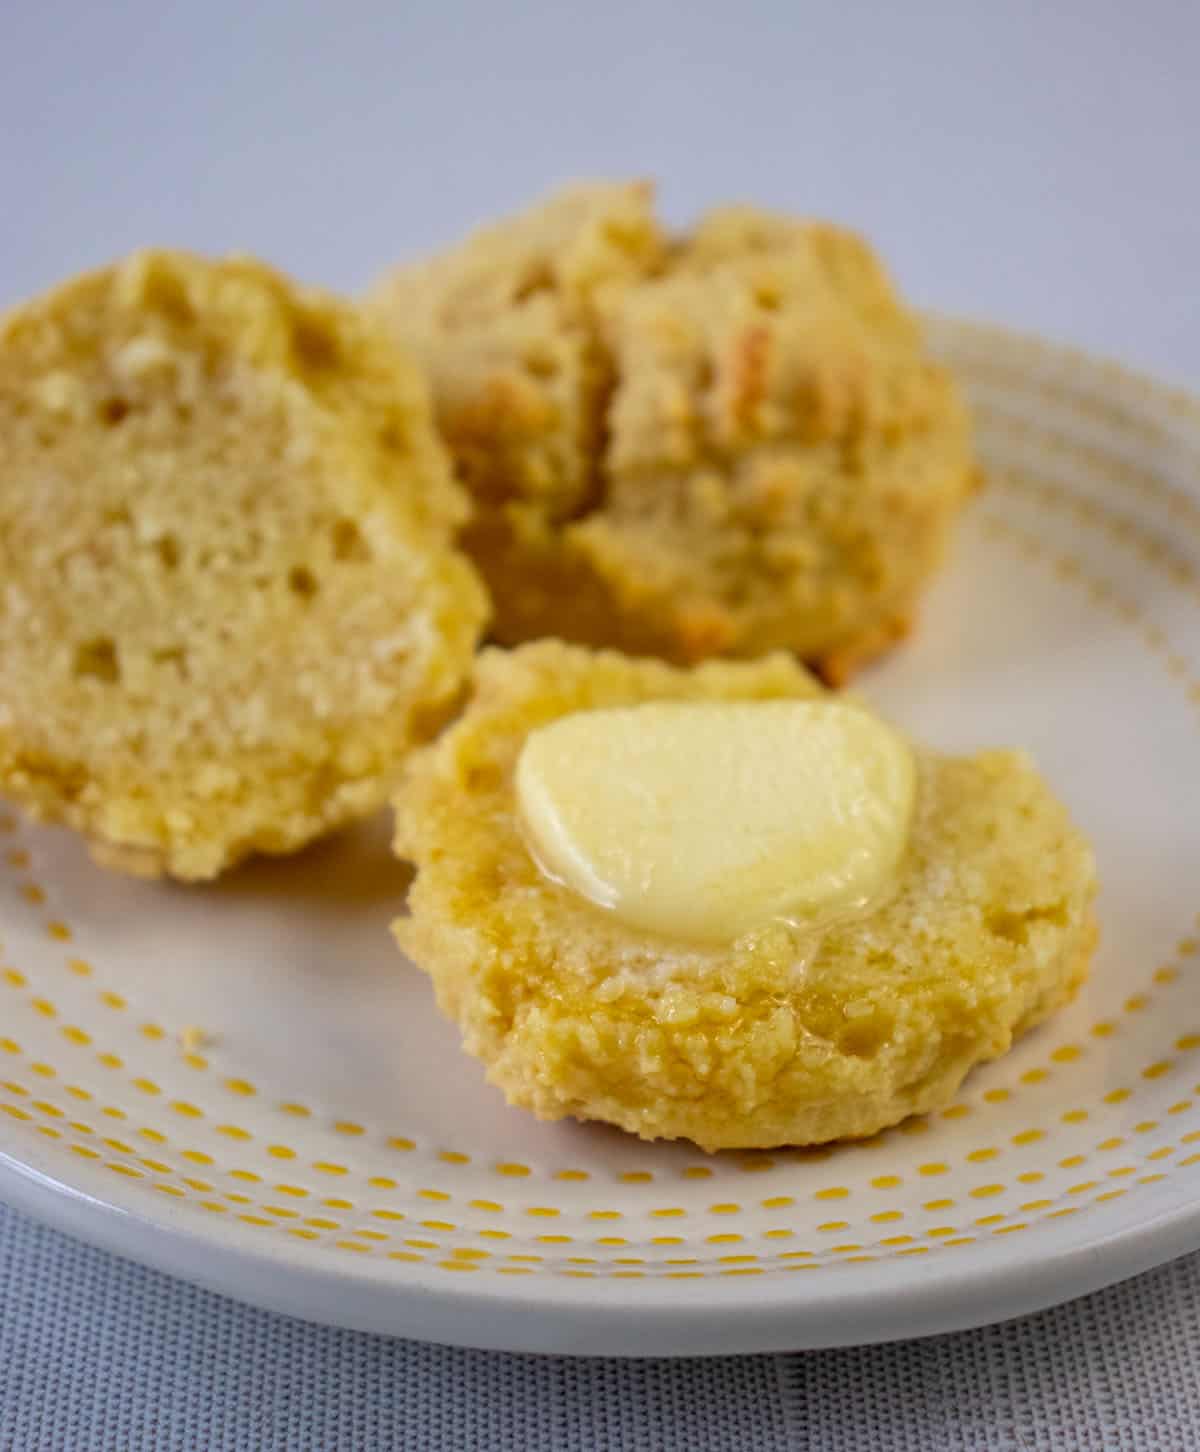 almond flour biscuits on a white plate with yellow trim. One biscuit slice in half with melted butter on it.